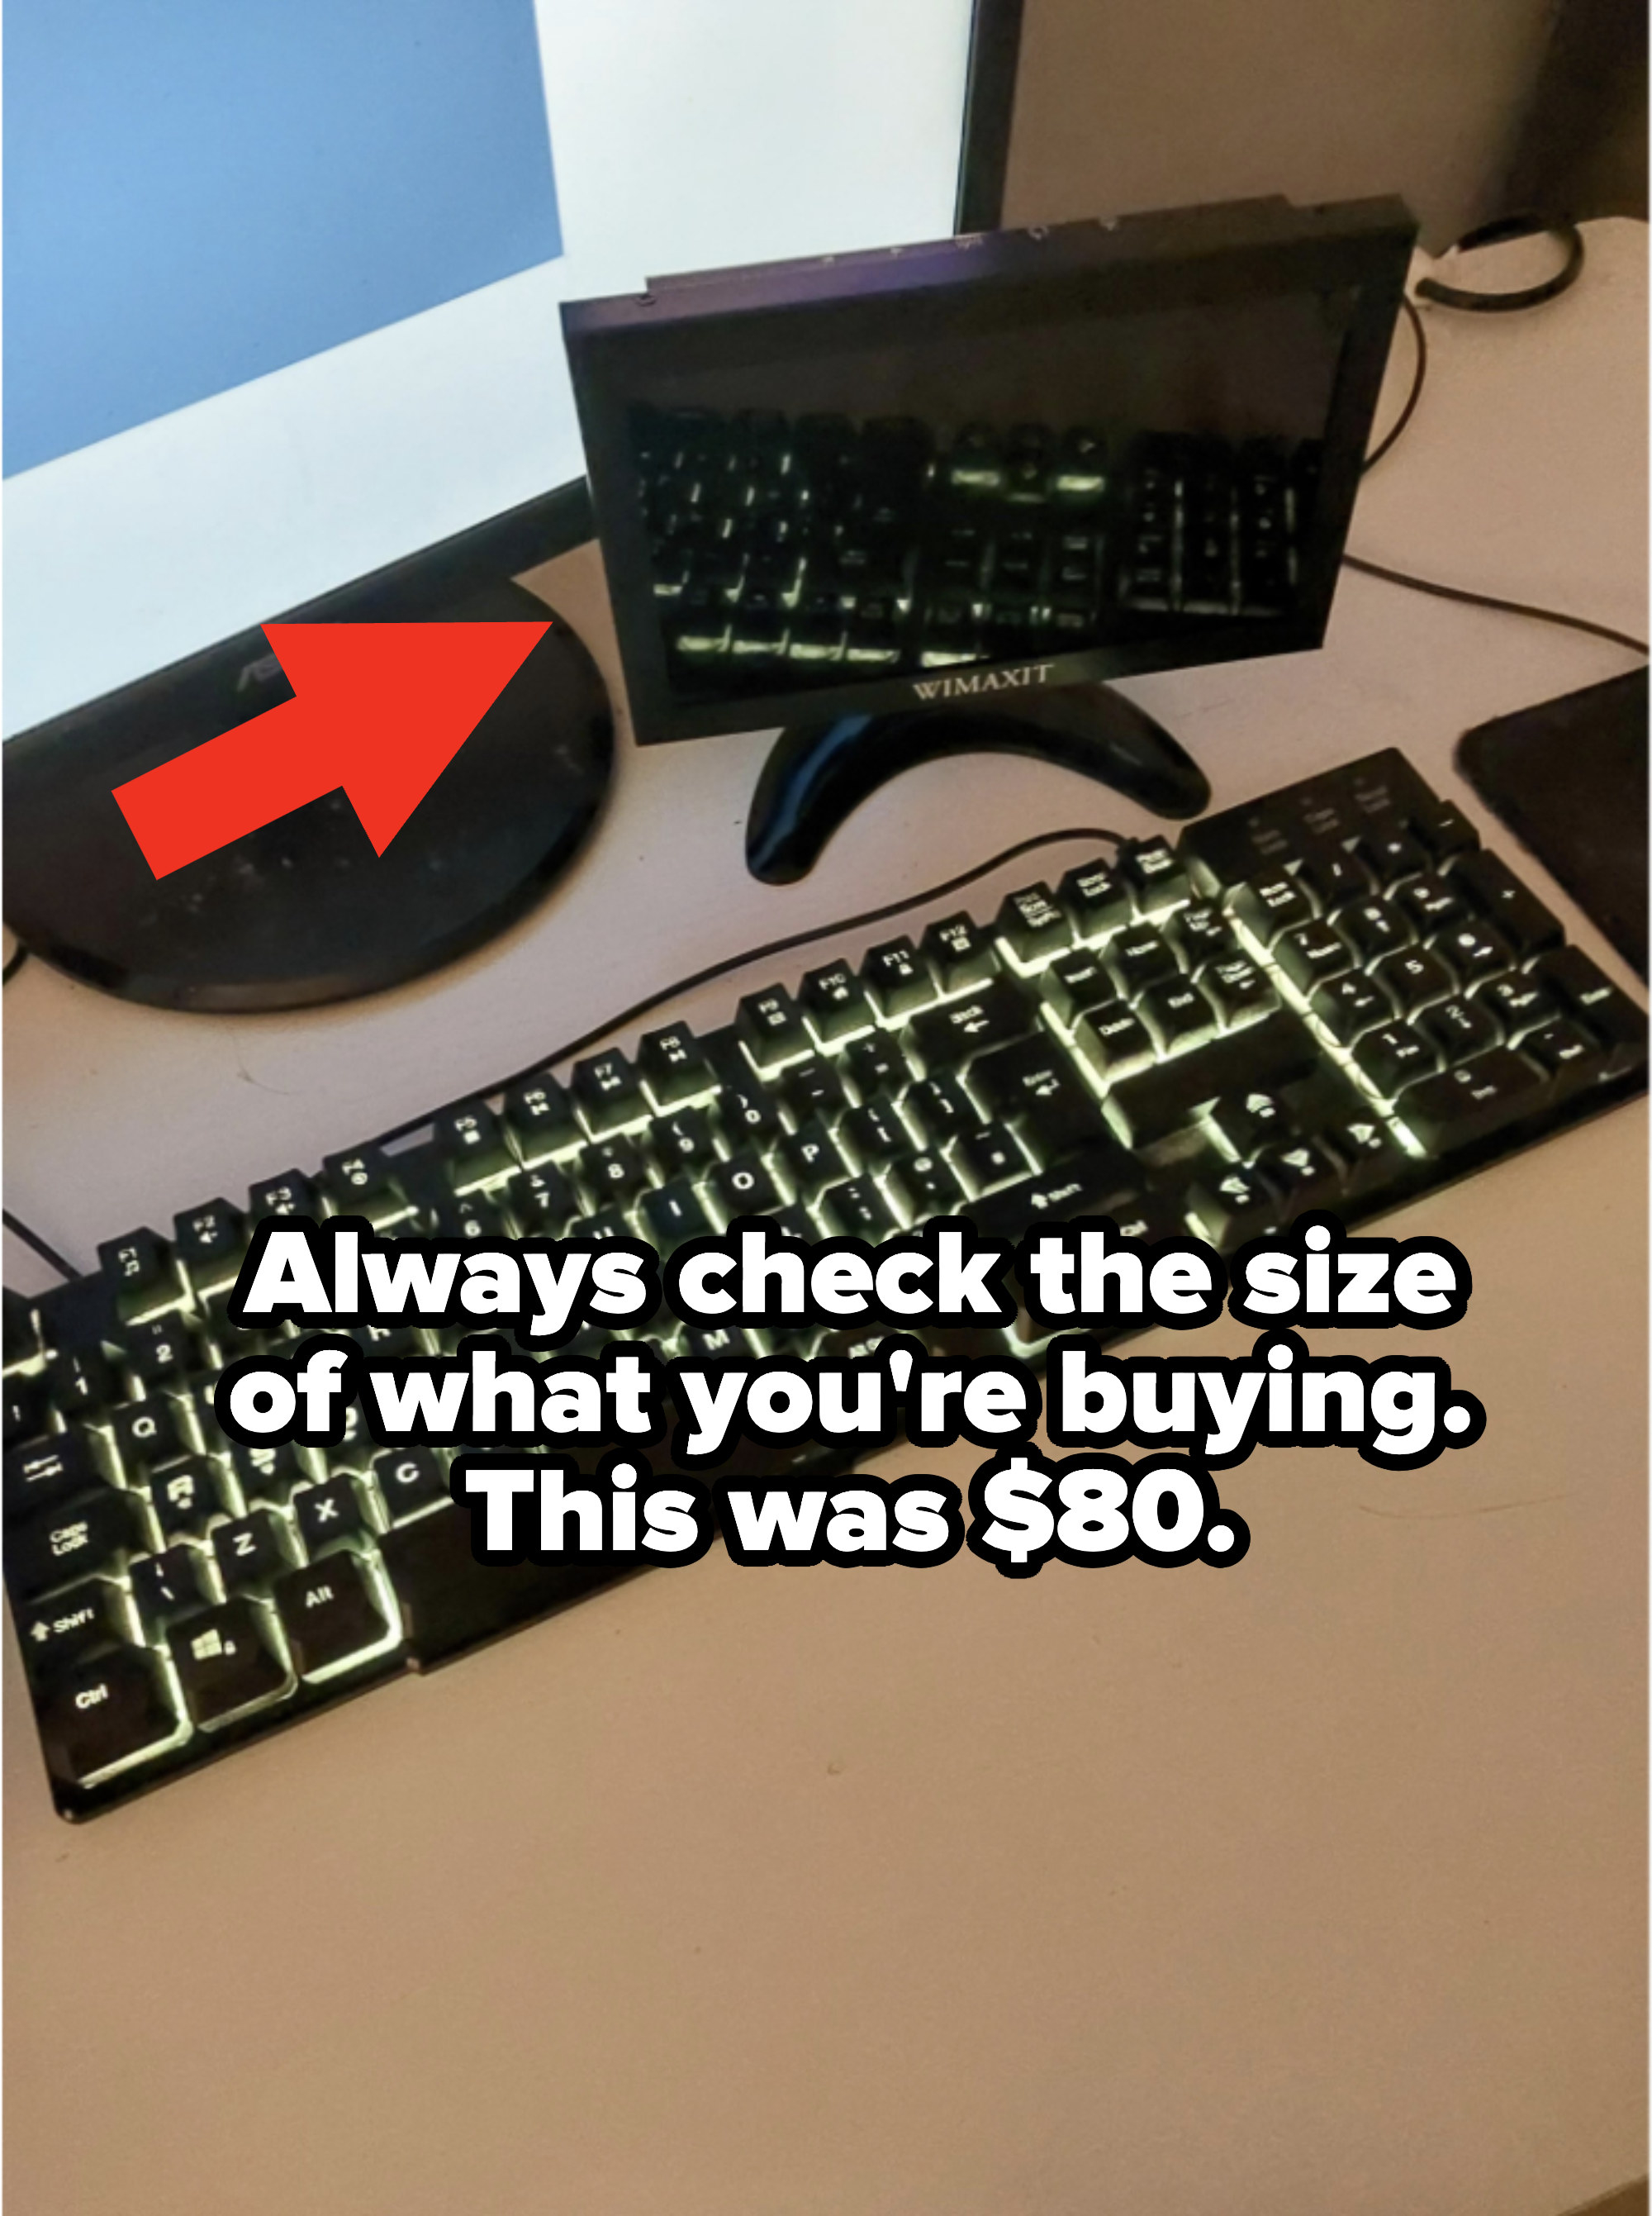 A tiny monitor next to a full-size keyboard